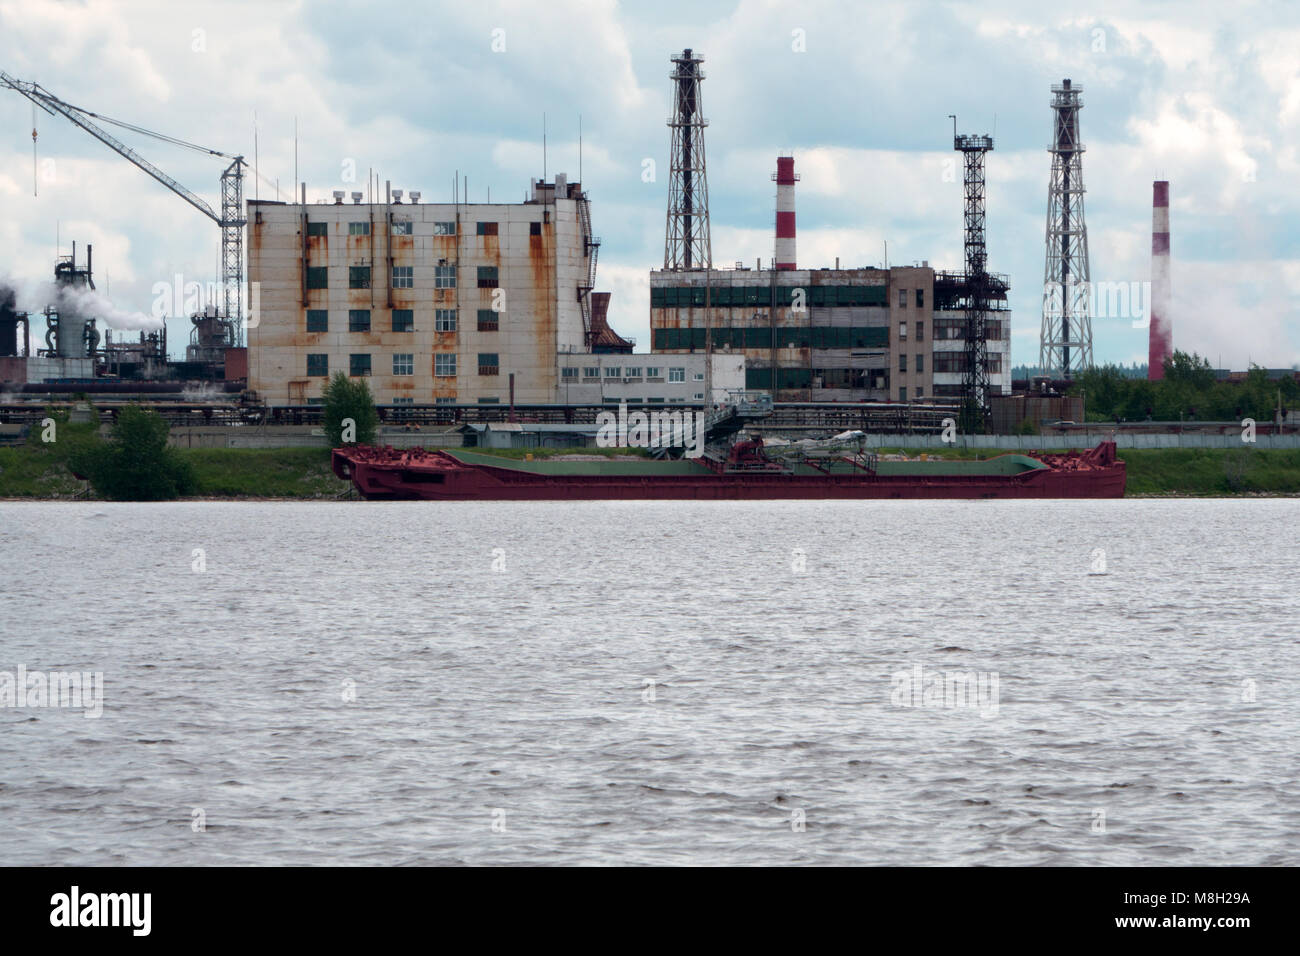 Cargo ship for sea transport.Large cargo ship.Large cargo ships parked in the river.Transshipment vessel Stock Photo